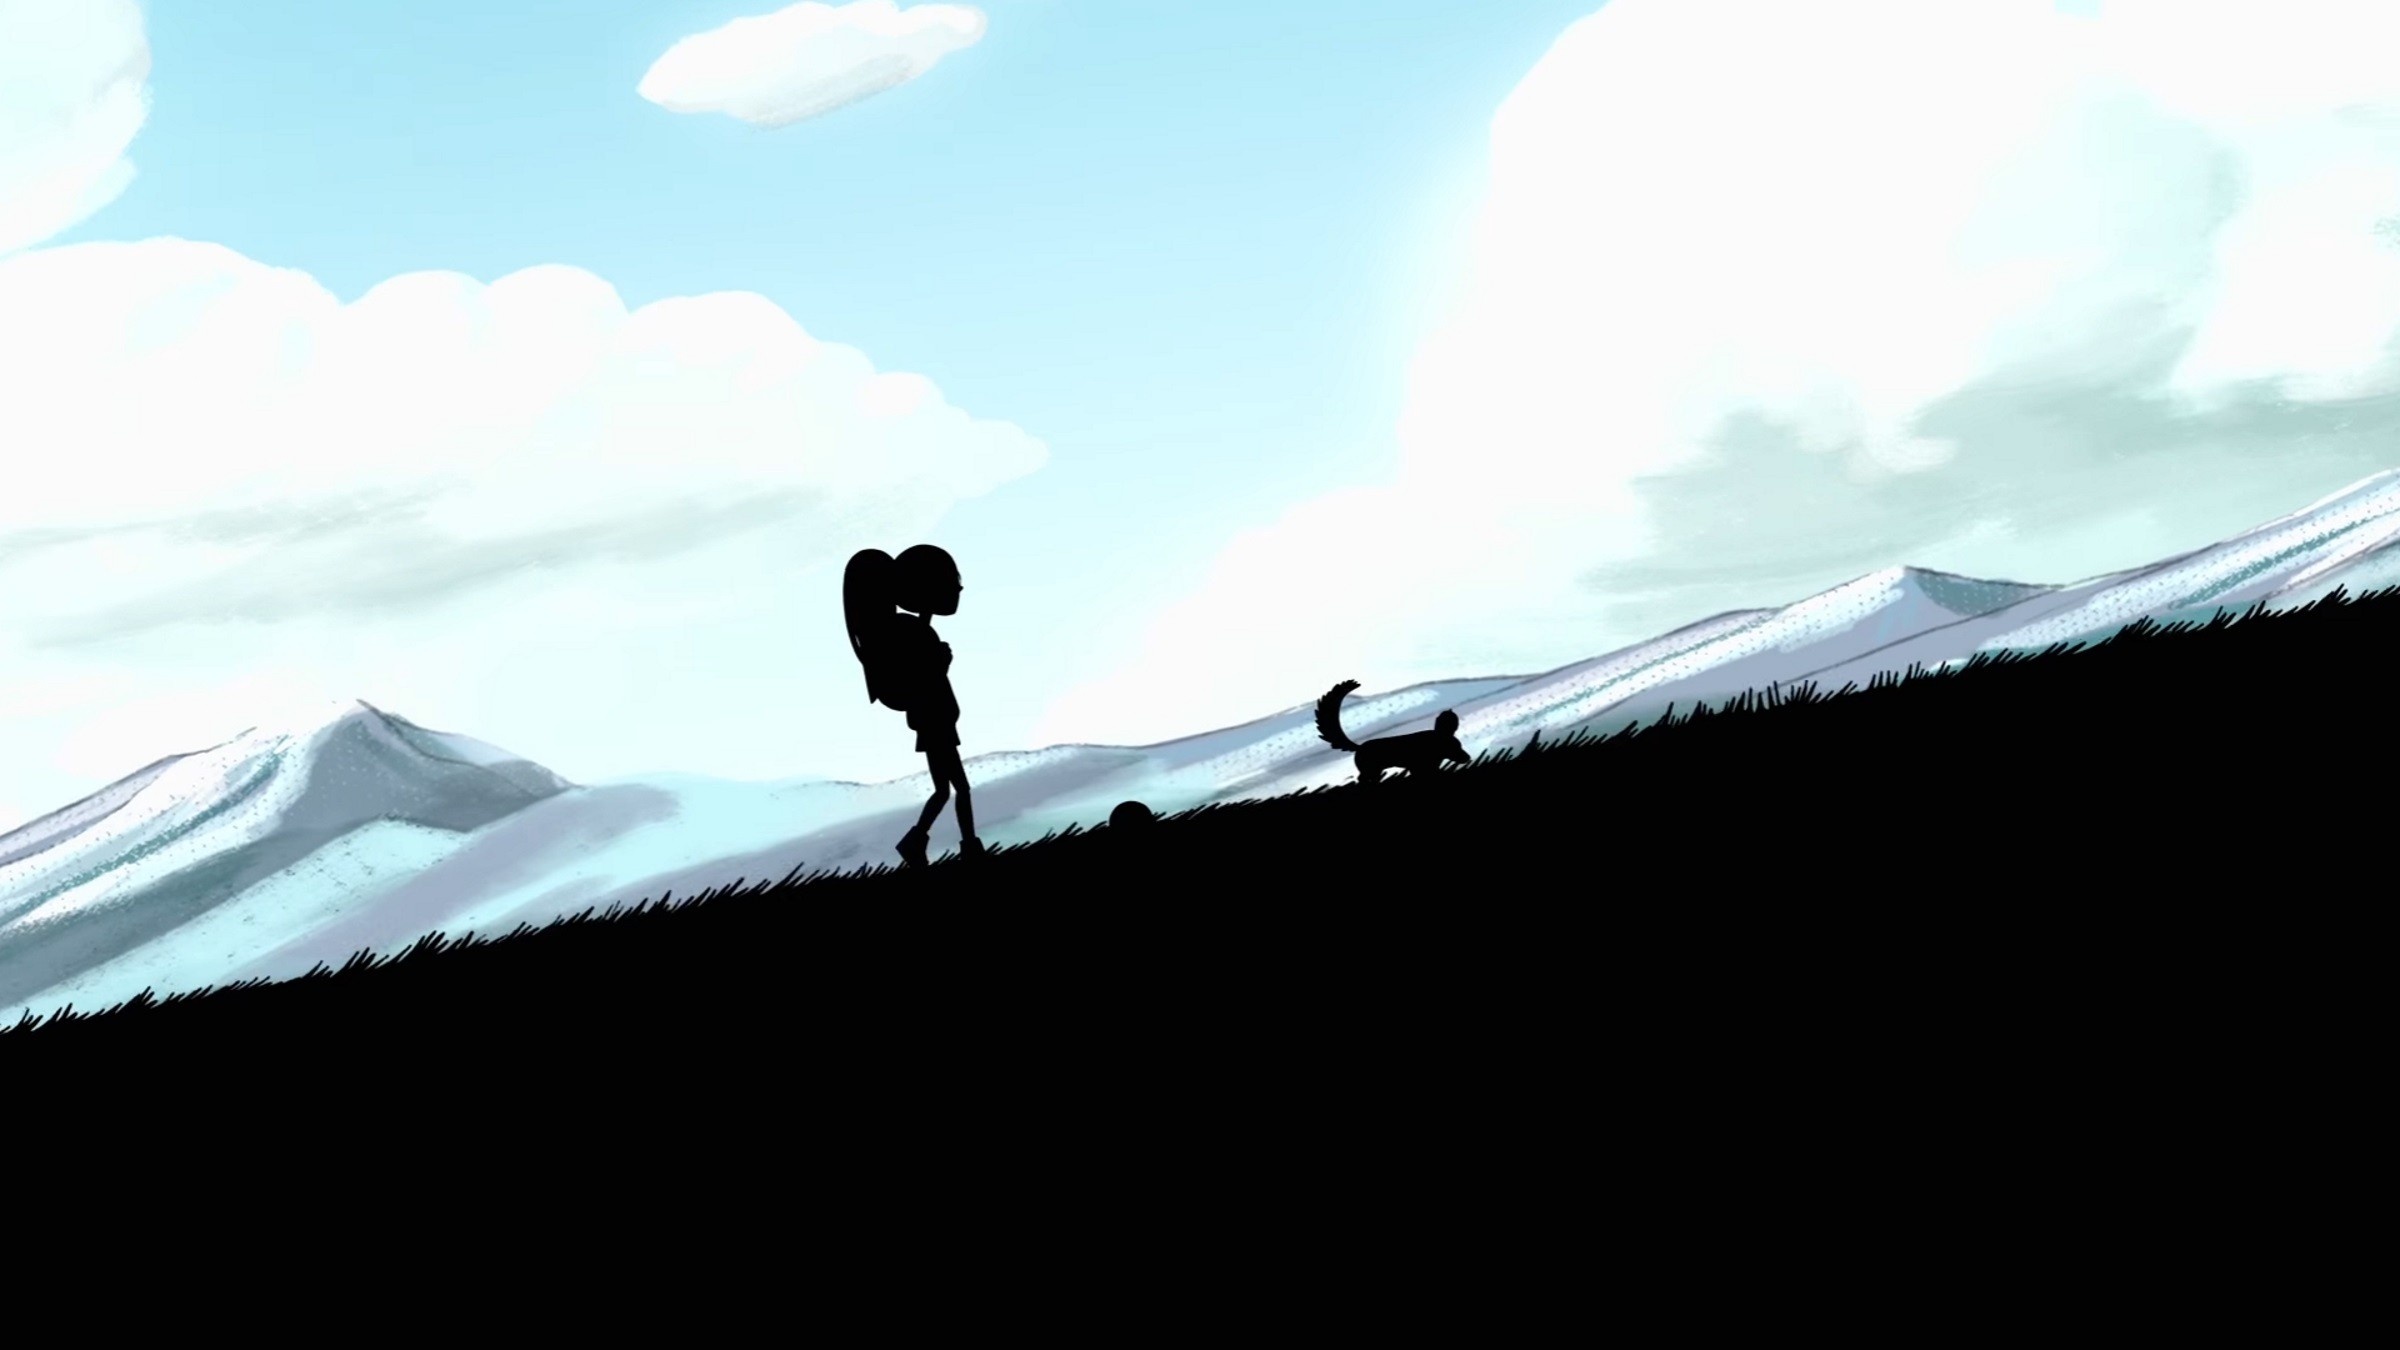 Infinity Train: A sci-fi series in which characters find themselves upon the endless train. 2400x1350 HD Wallpaper.